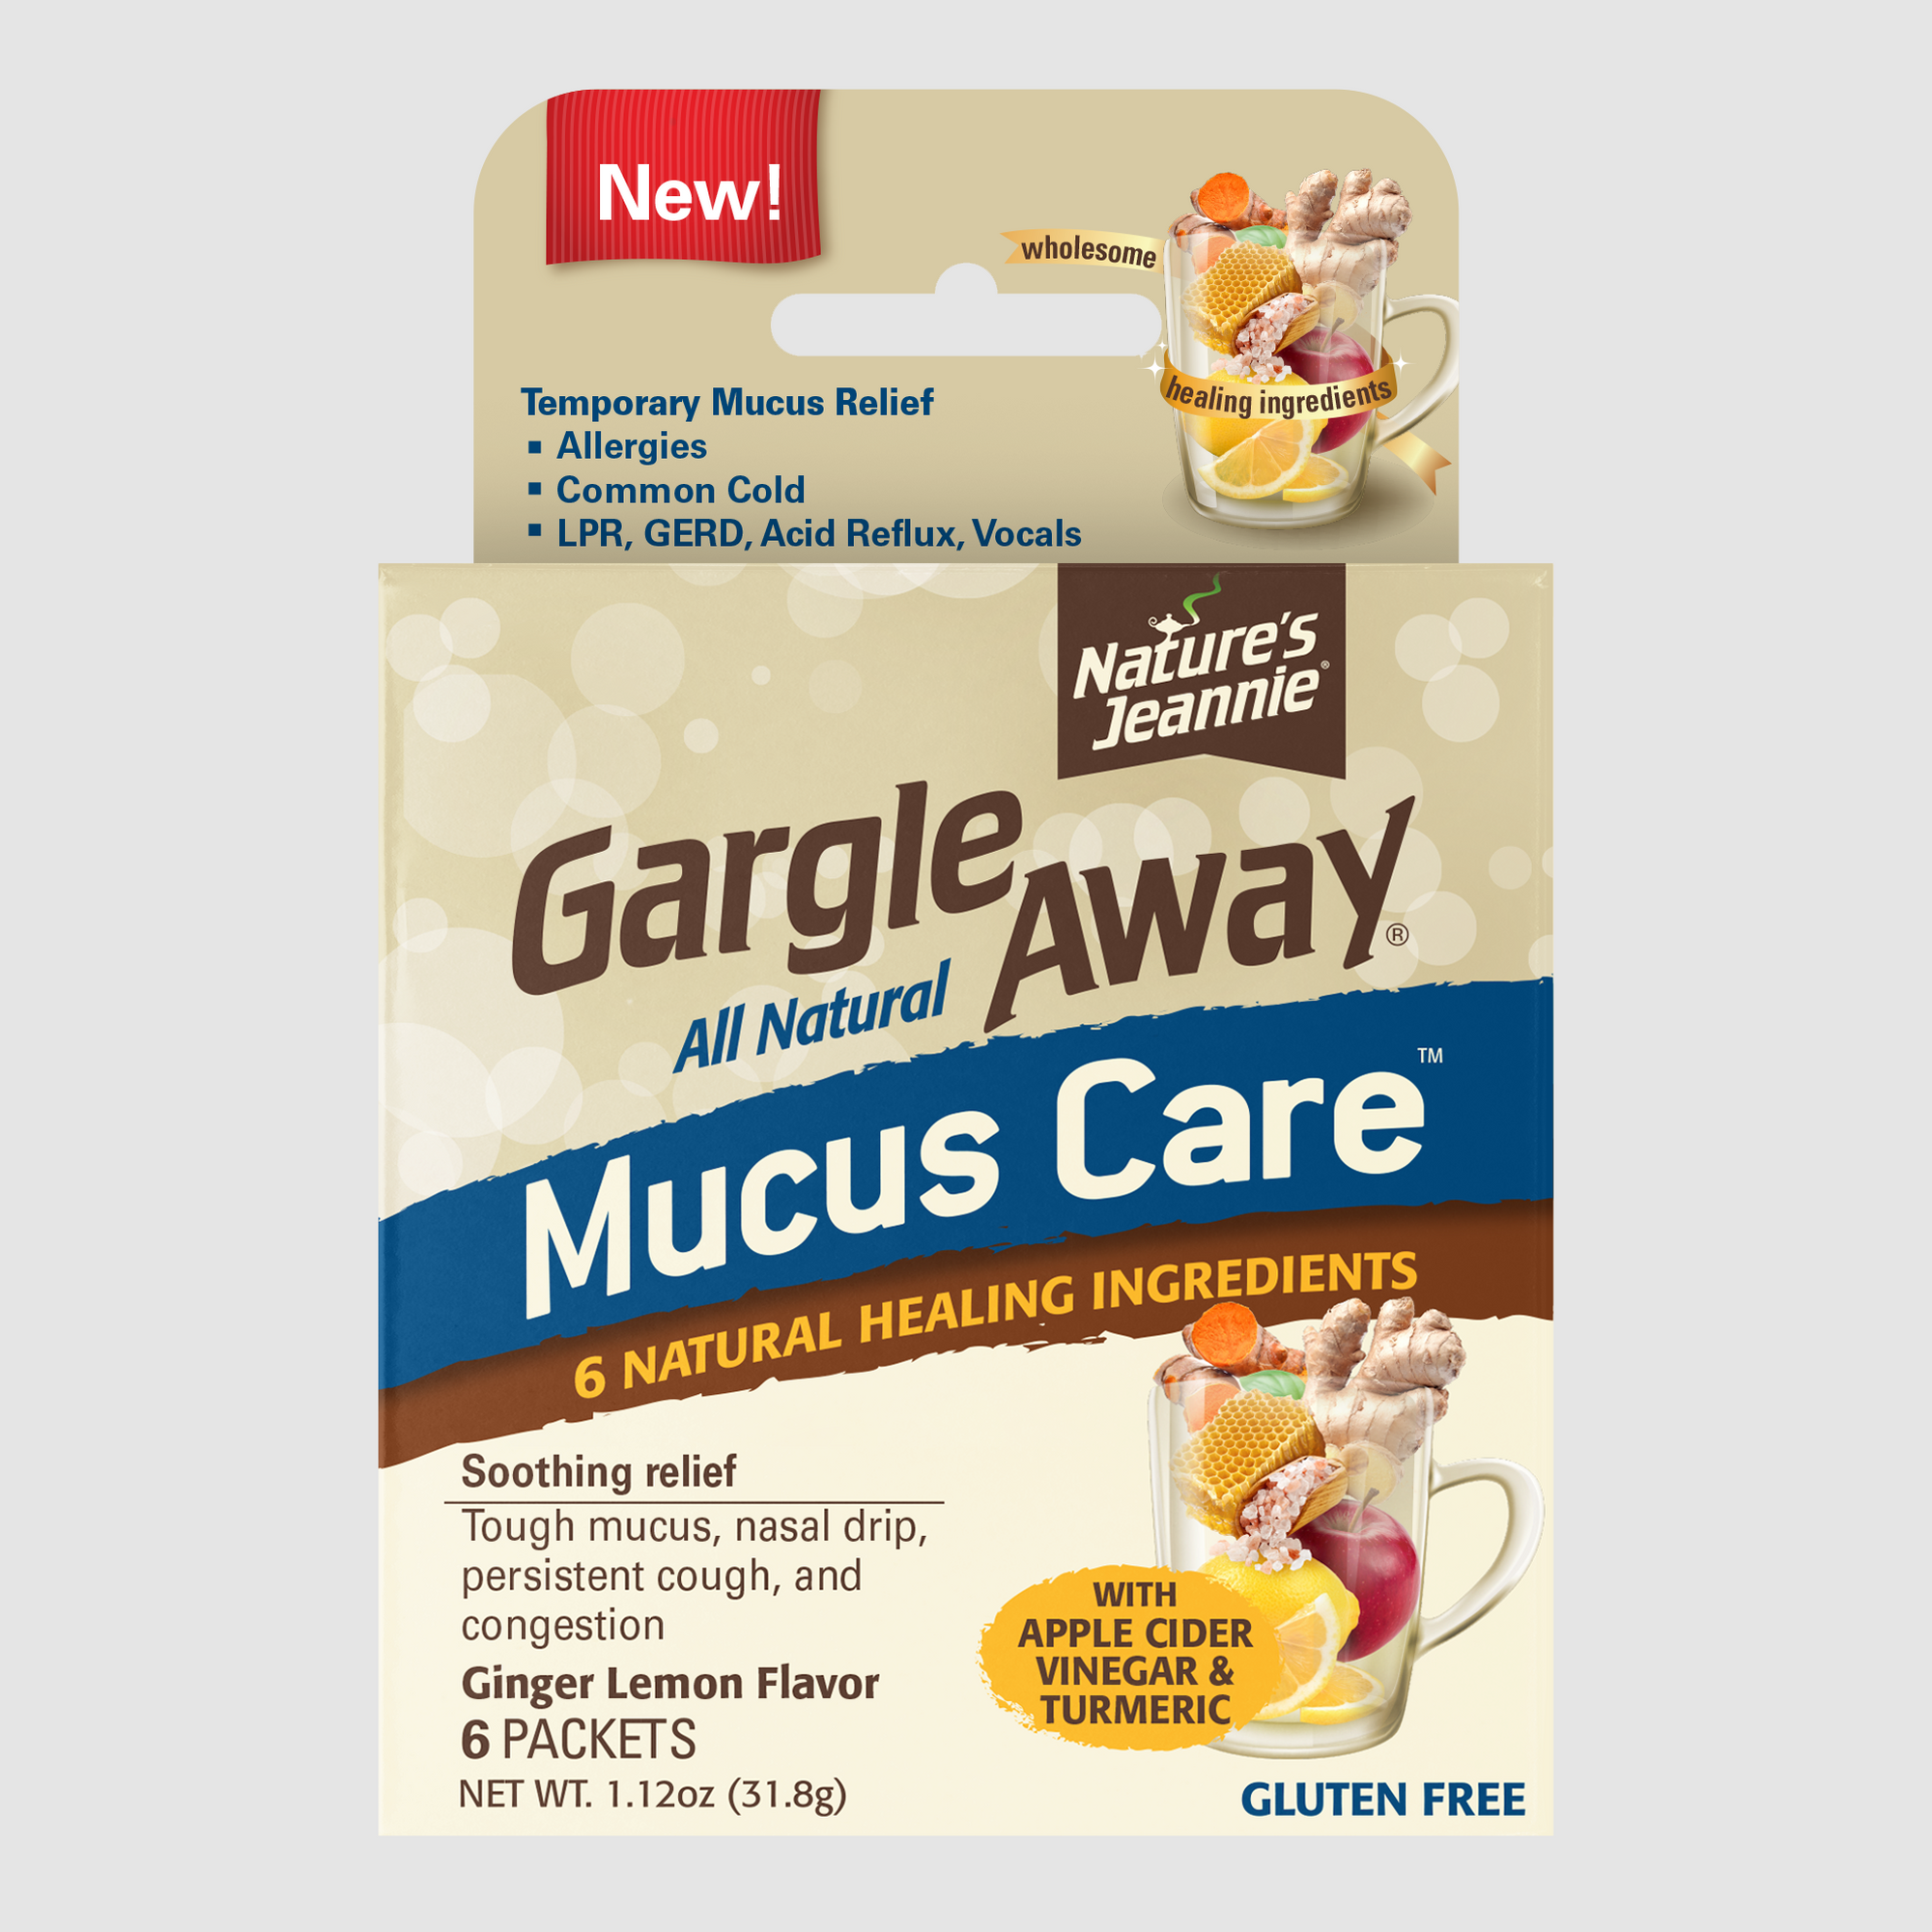 Product package image of Gargle Away Mucus Care, shows product claims on pack close-up: Soothing relief of tough mucus, nasal drip, persistent cough, and congestion.